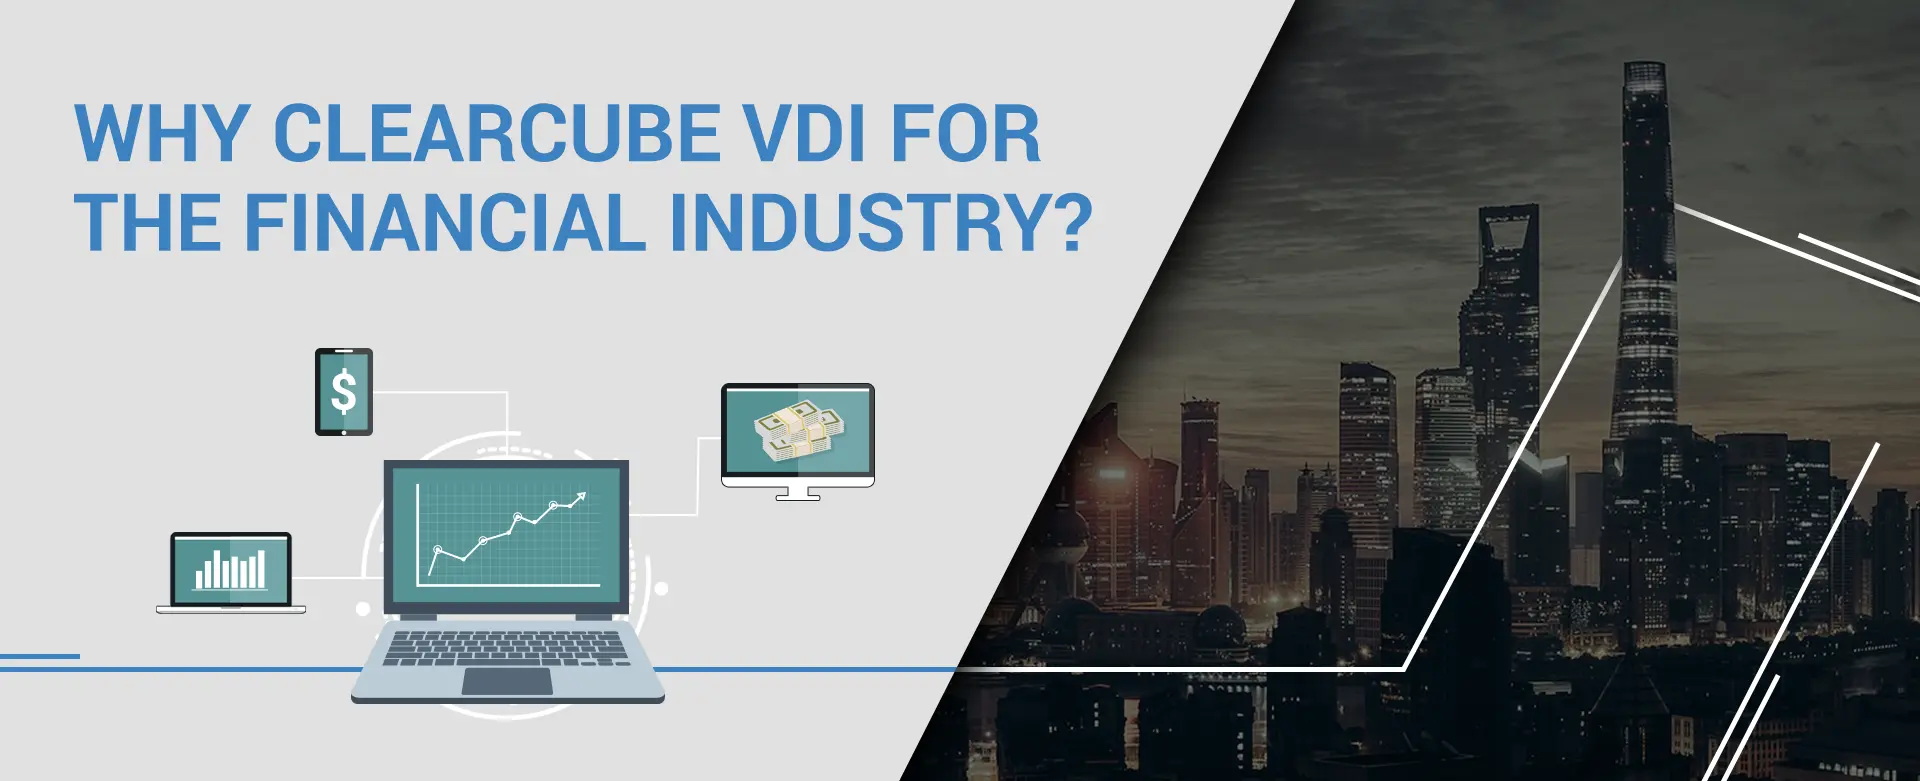 Why ClearCube VDI for the Financial Industry?